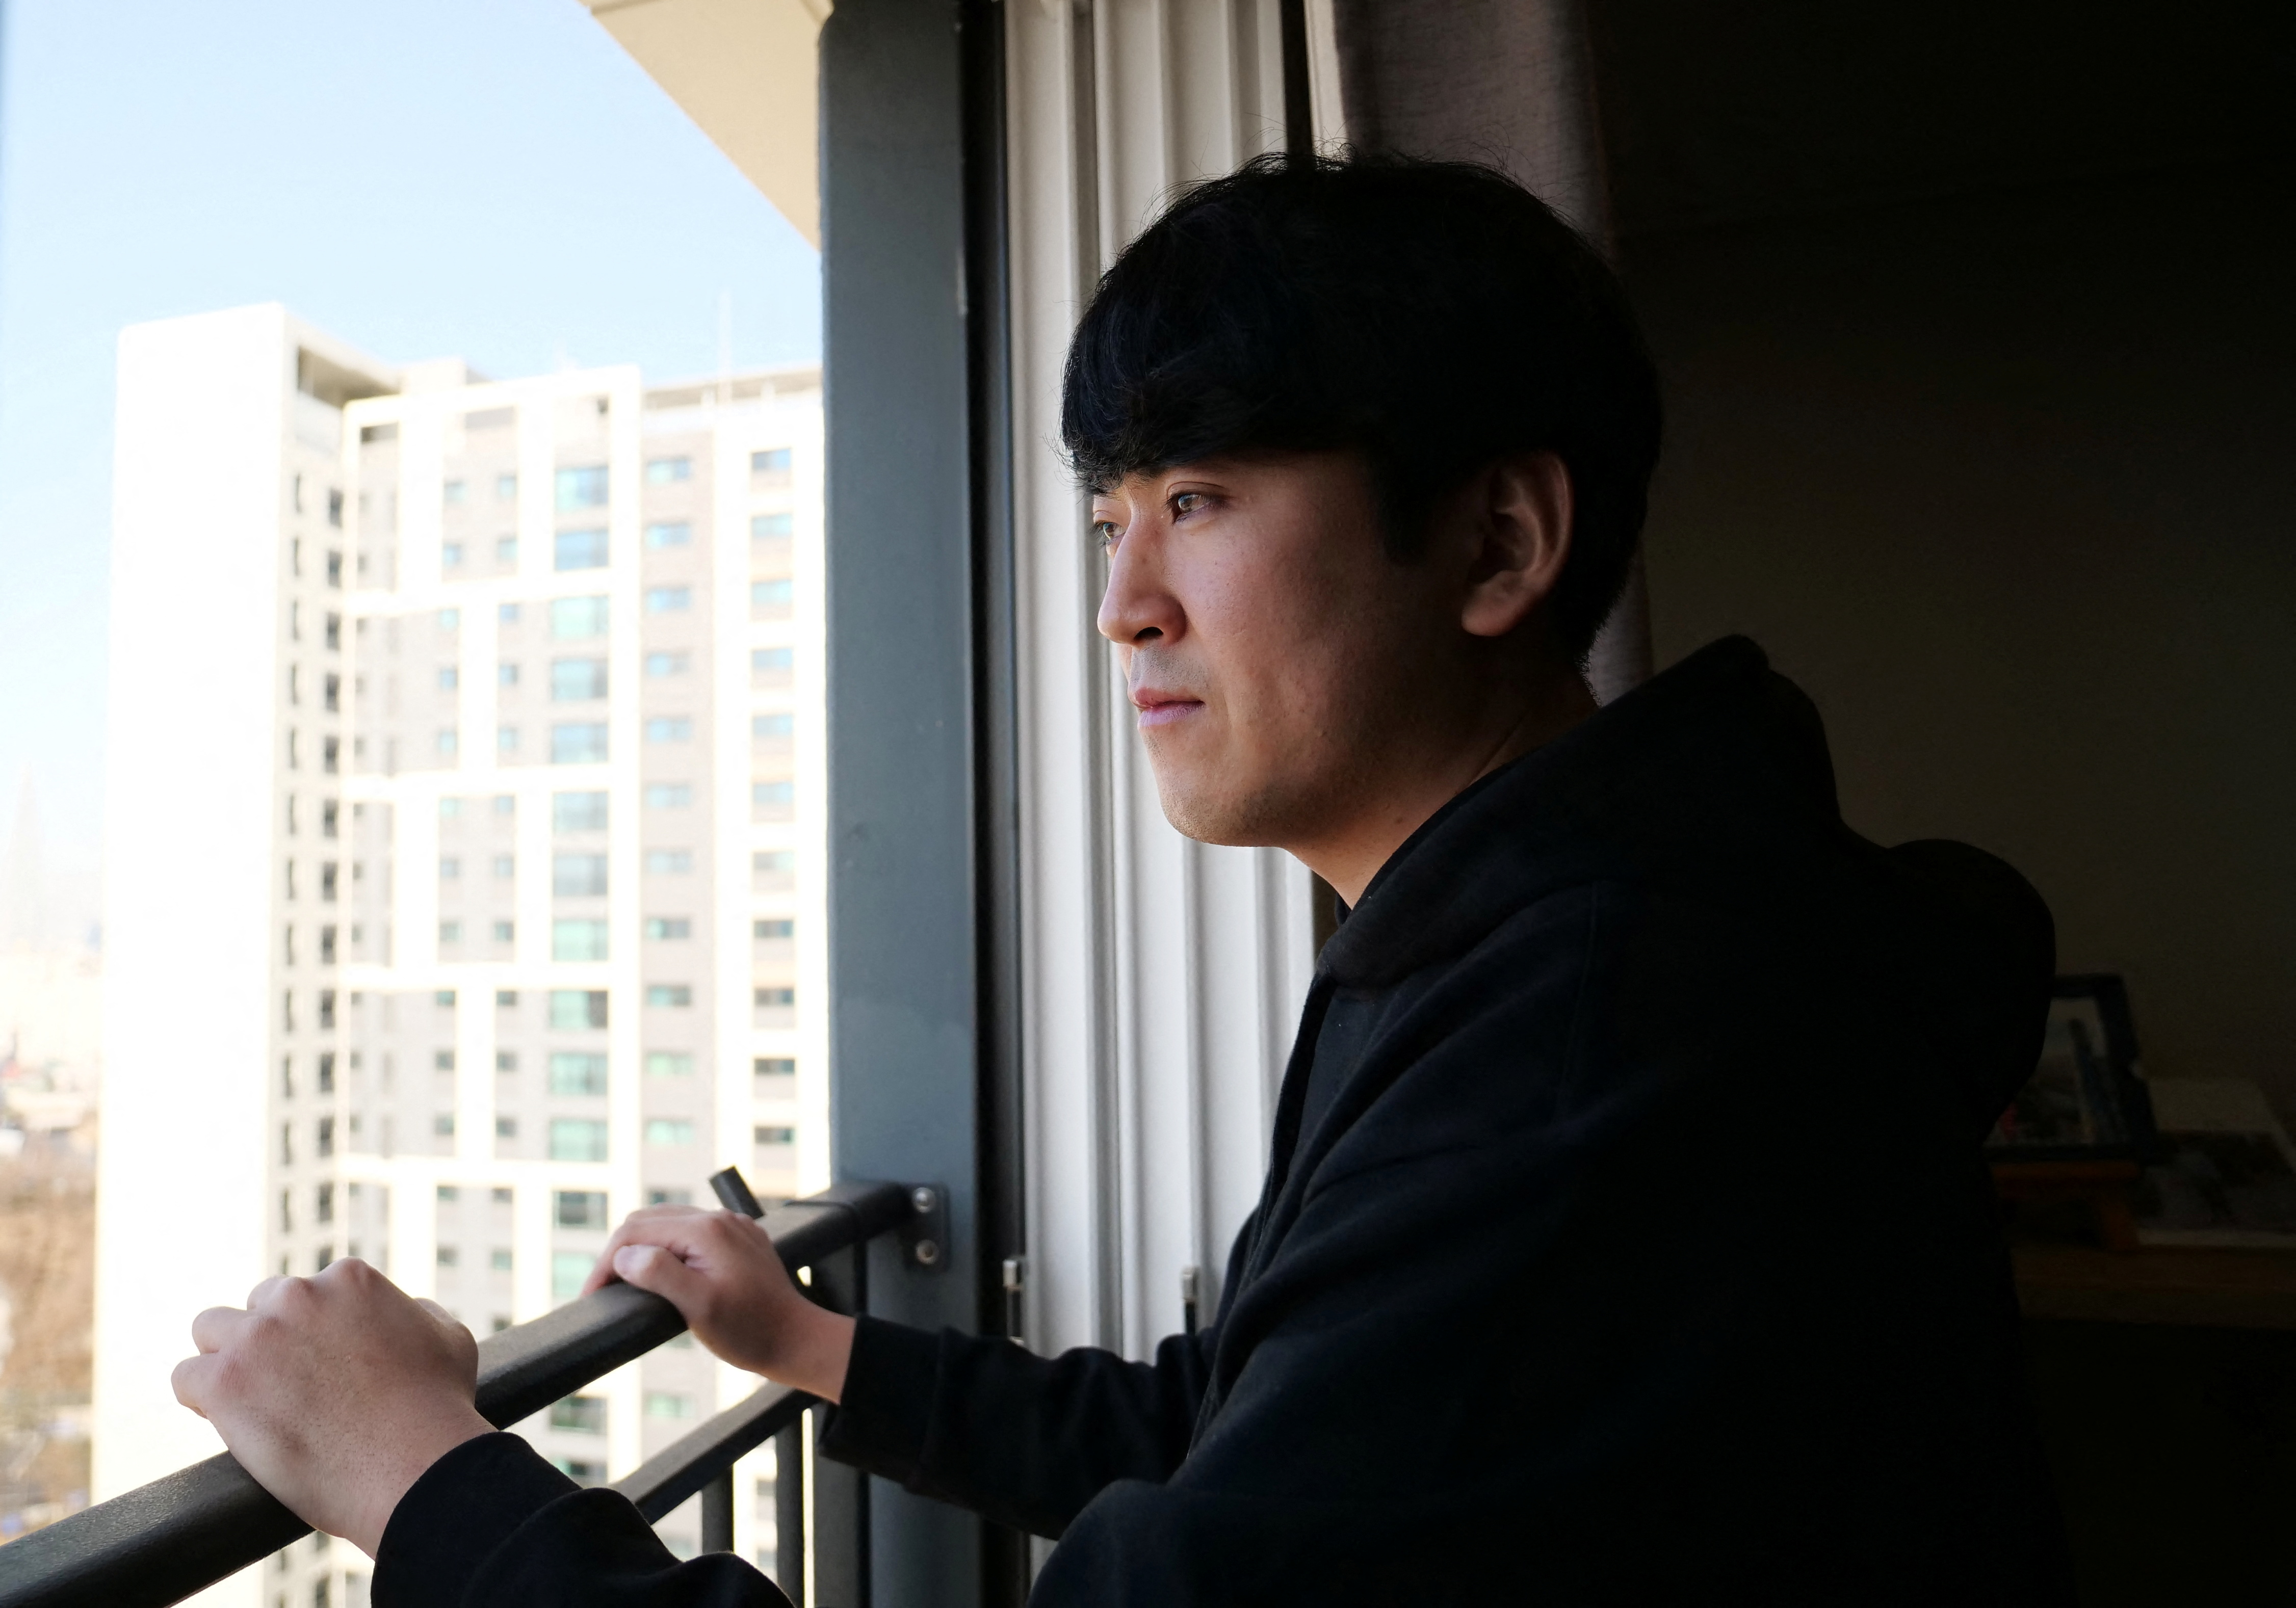 Jang Sung-won, 32, who owns YouTube channel Saver King, looks out from his home in Paju